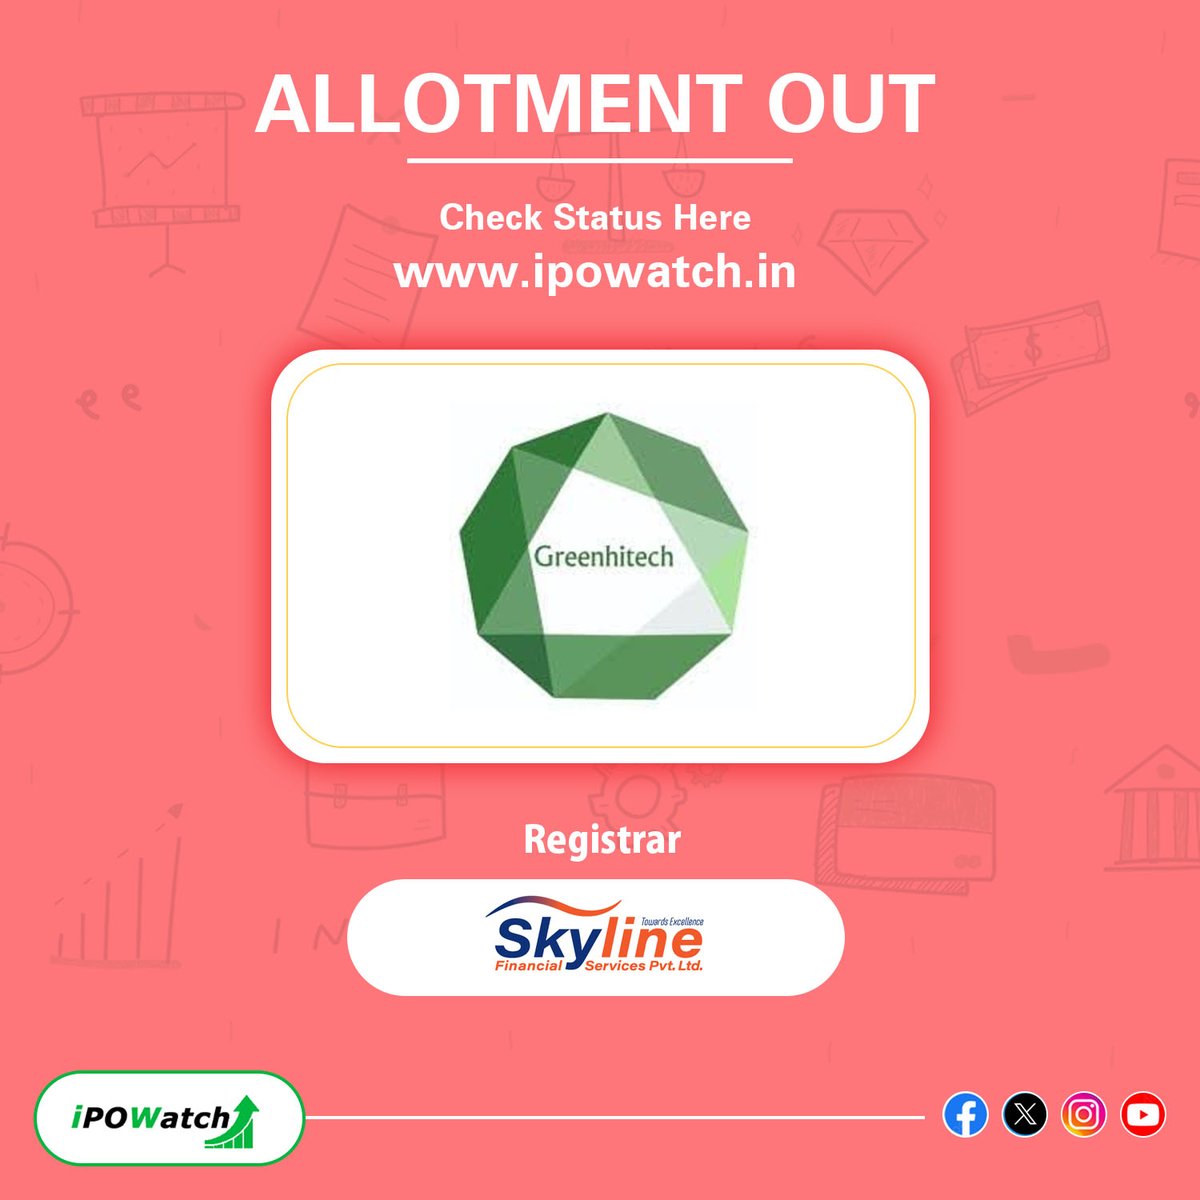 ⮞IPO Alert 🔔

🔸 IPO Allotment Out Status 🔔🔊
⮞ Greenhitech Ventures

Stay connected 🤝 with us for all the IPO-related updates 💪

#ipo #greenhitechventures #ipowatch #ipoupdates #ipoallotment #ipolisting #sharemarket #ipoalert